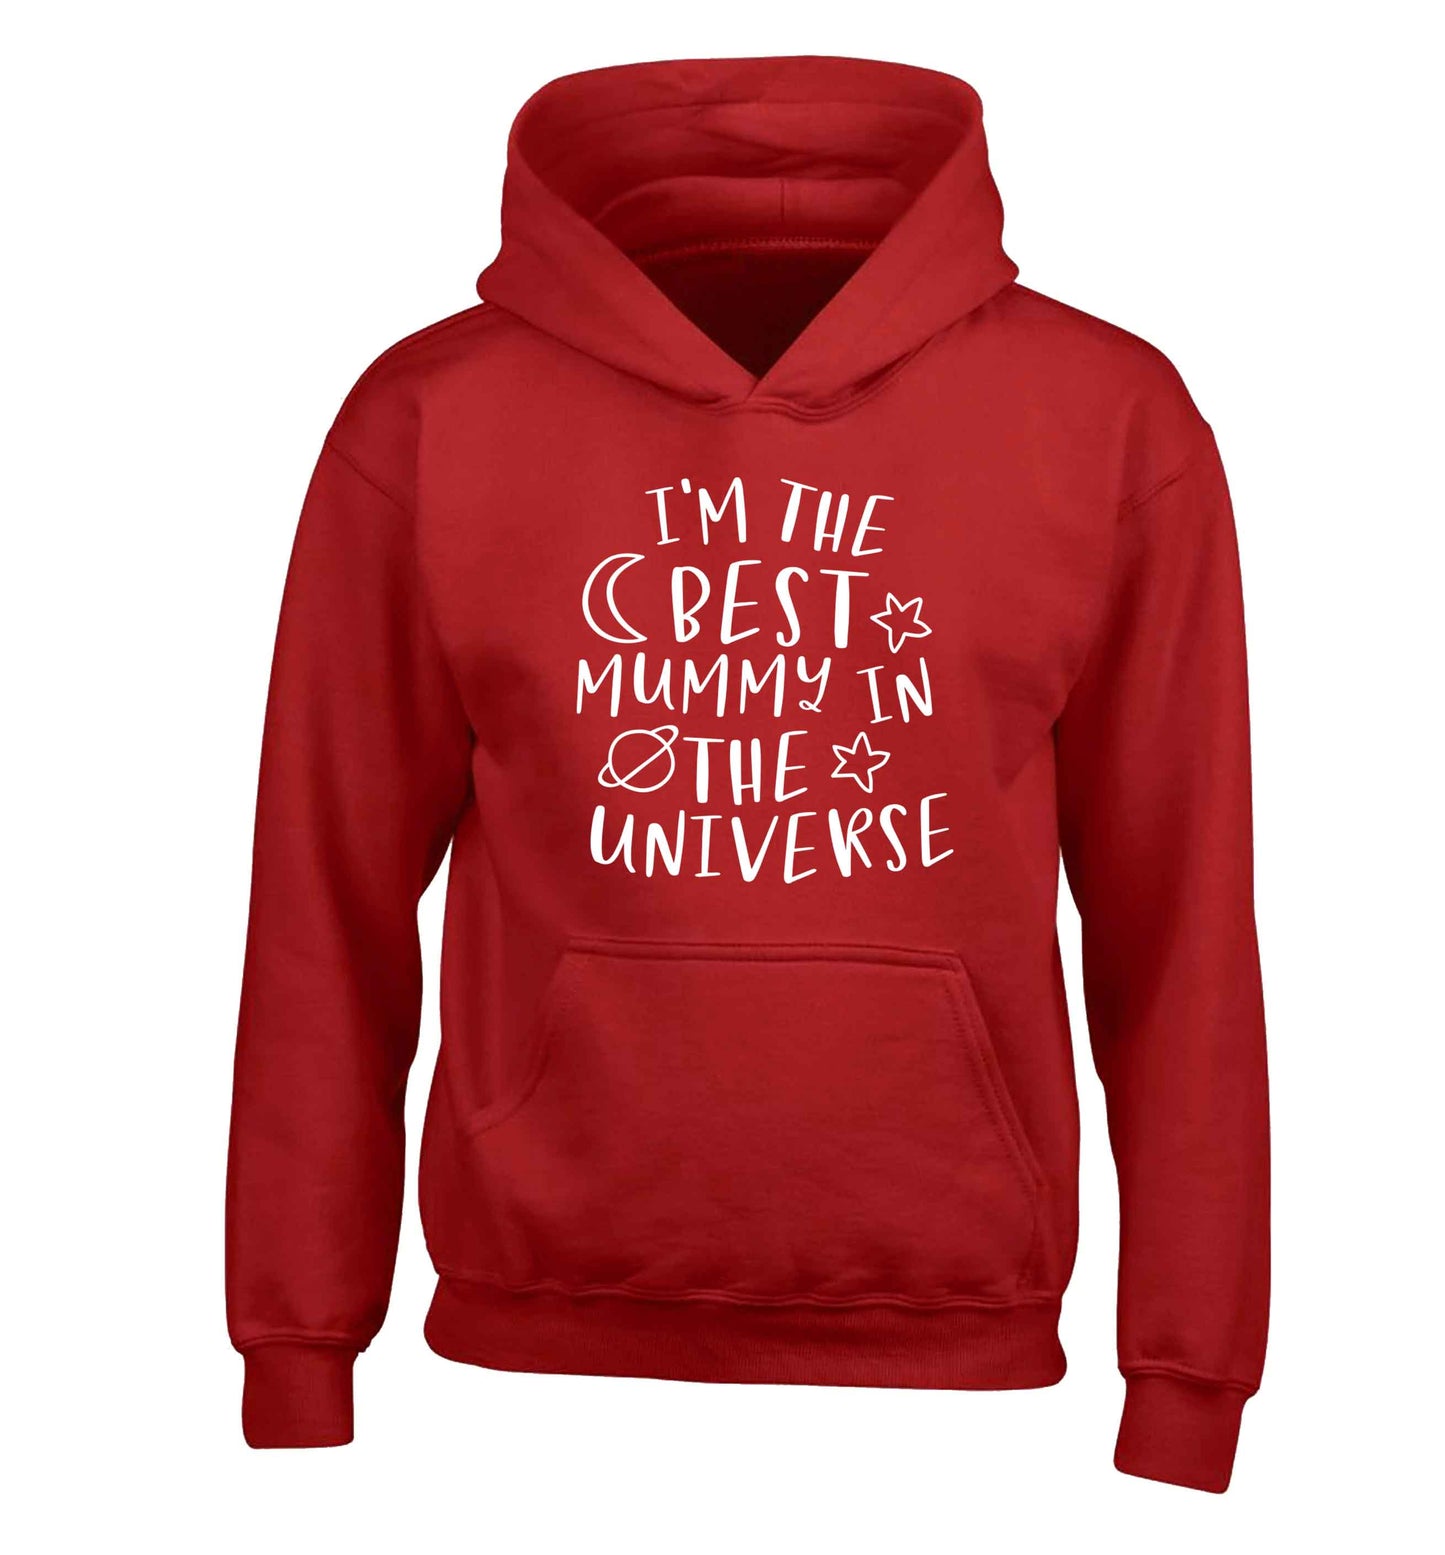 I'm the best mummy in the universe children's red hoodie 12-13 Years